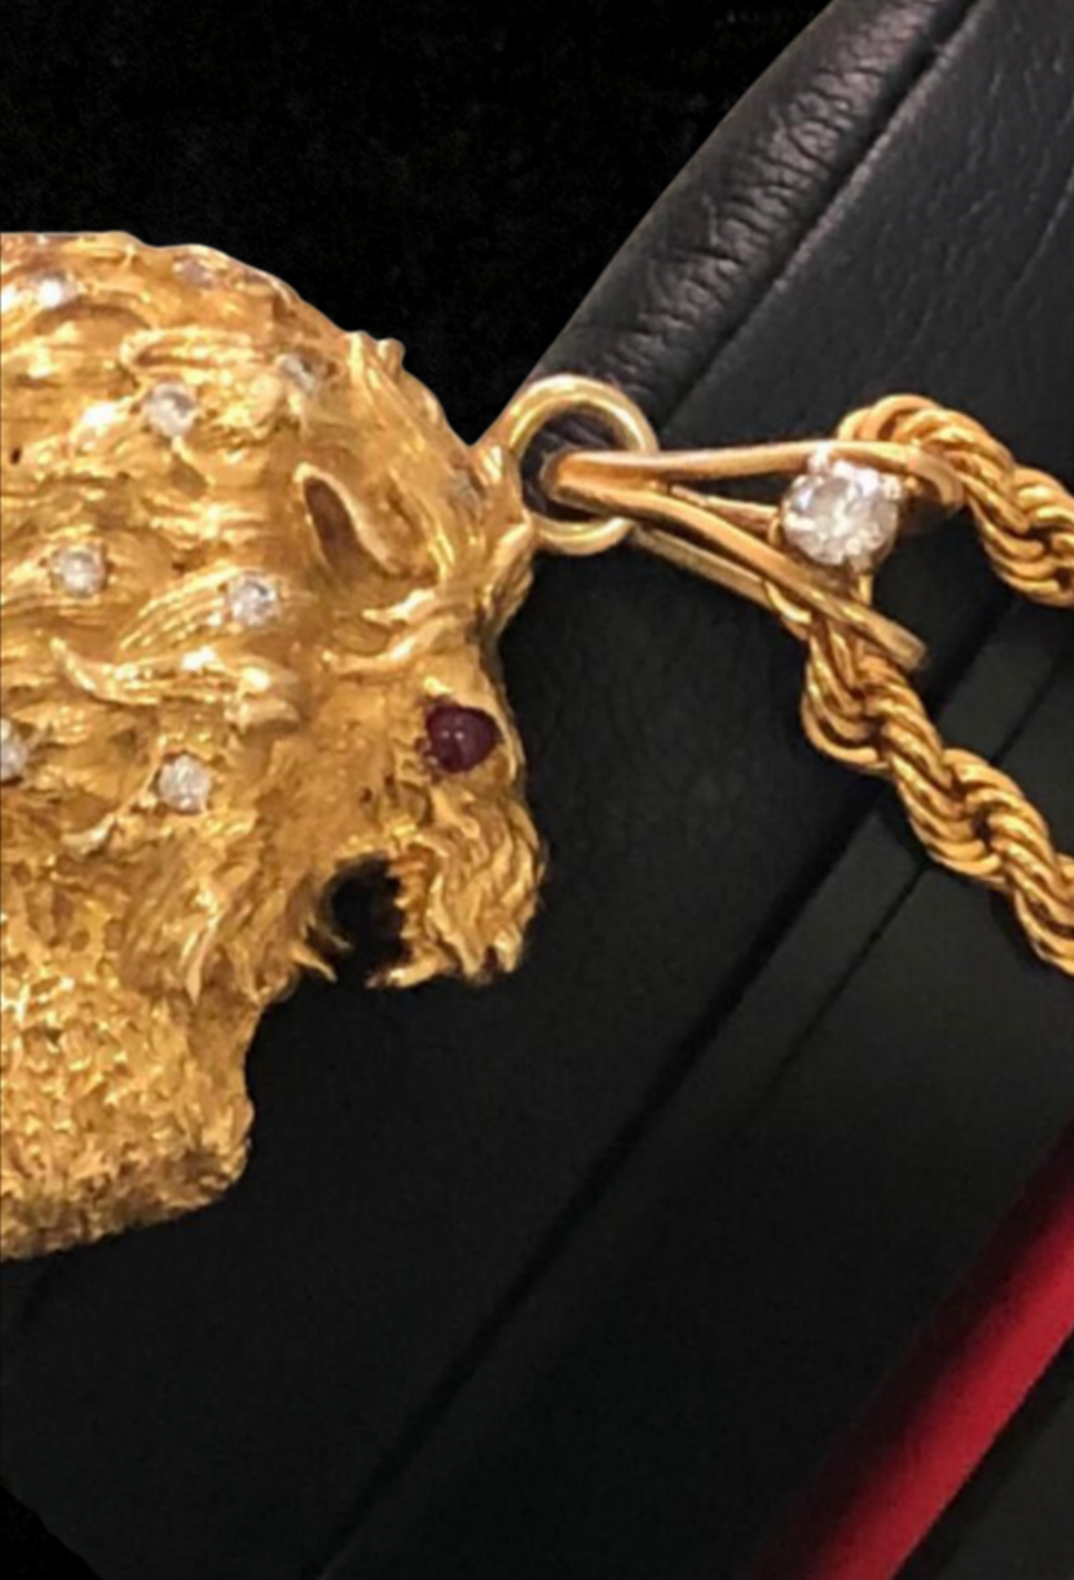 Elvis Presley Lion Claw Necklace Up For Auction, Expected to Fetch $500K